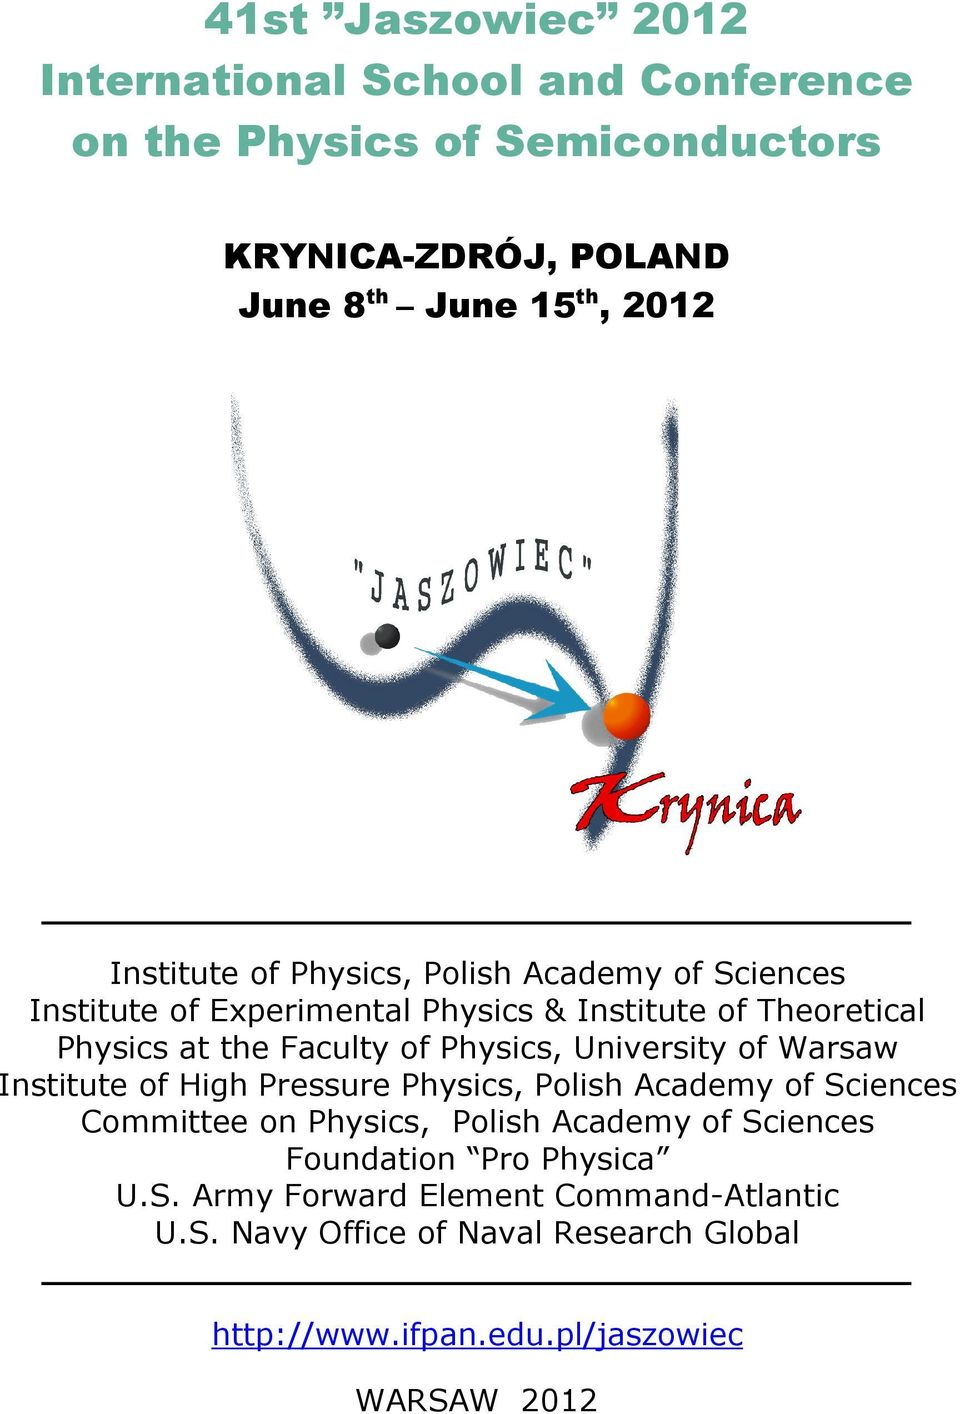 Physics, University of Warsaw Institute of High Pressure Physics, Polish Academy of Sciences Committee on Physics, Polish Academy of Sciences